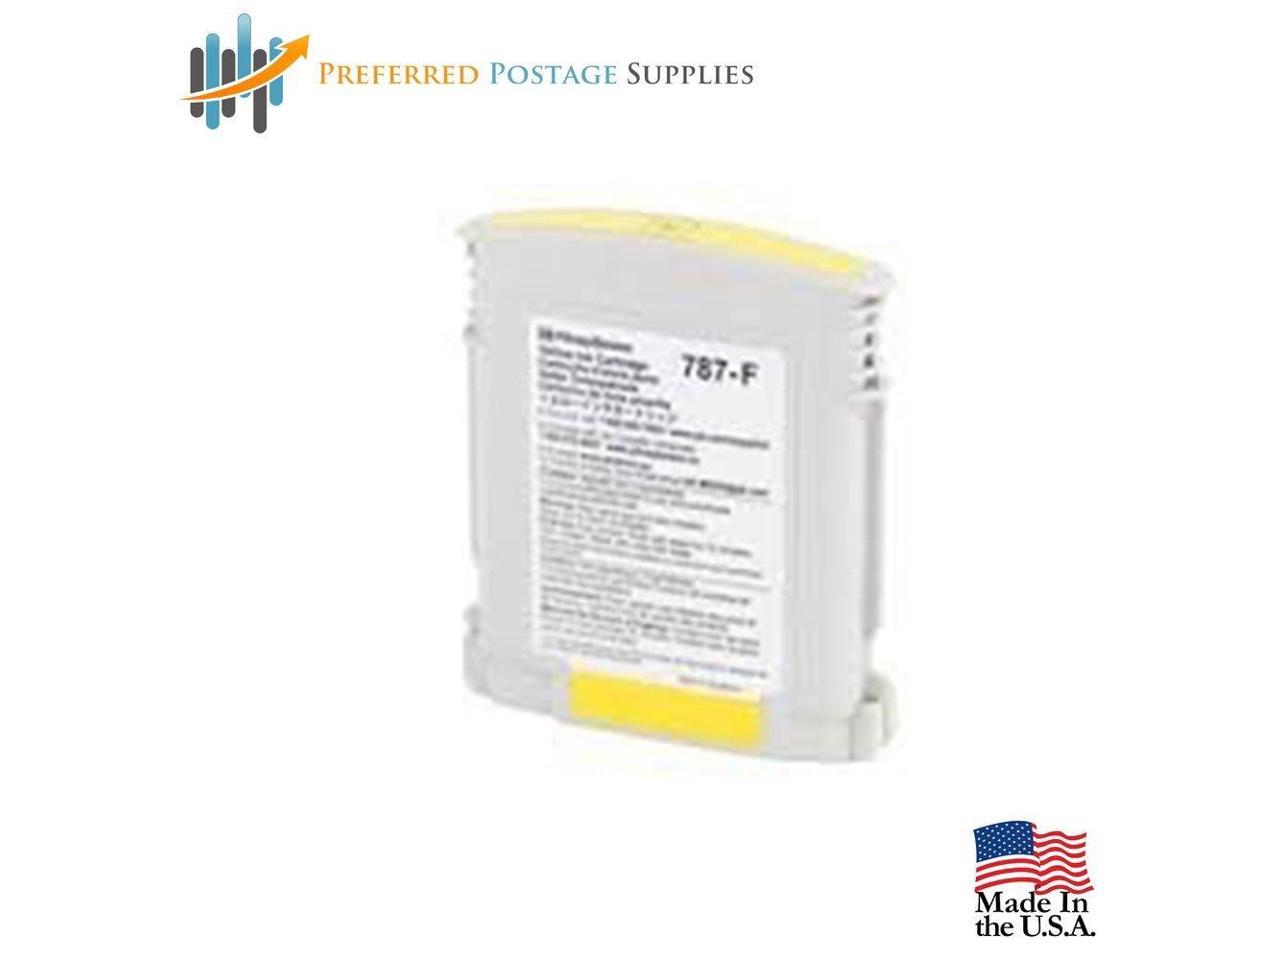 Ink Cartridge,Sealing Solution,Tape,787-1,Max Volume,Preferred Postage Supplies 